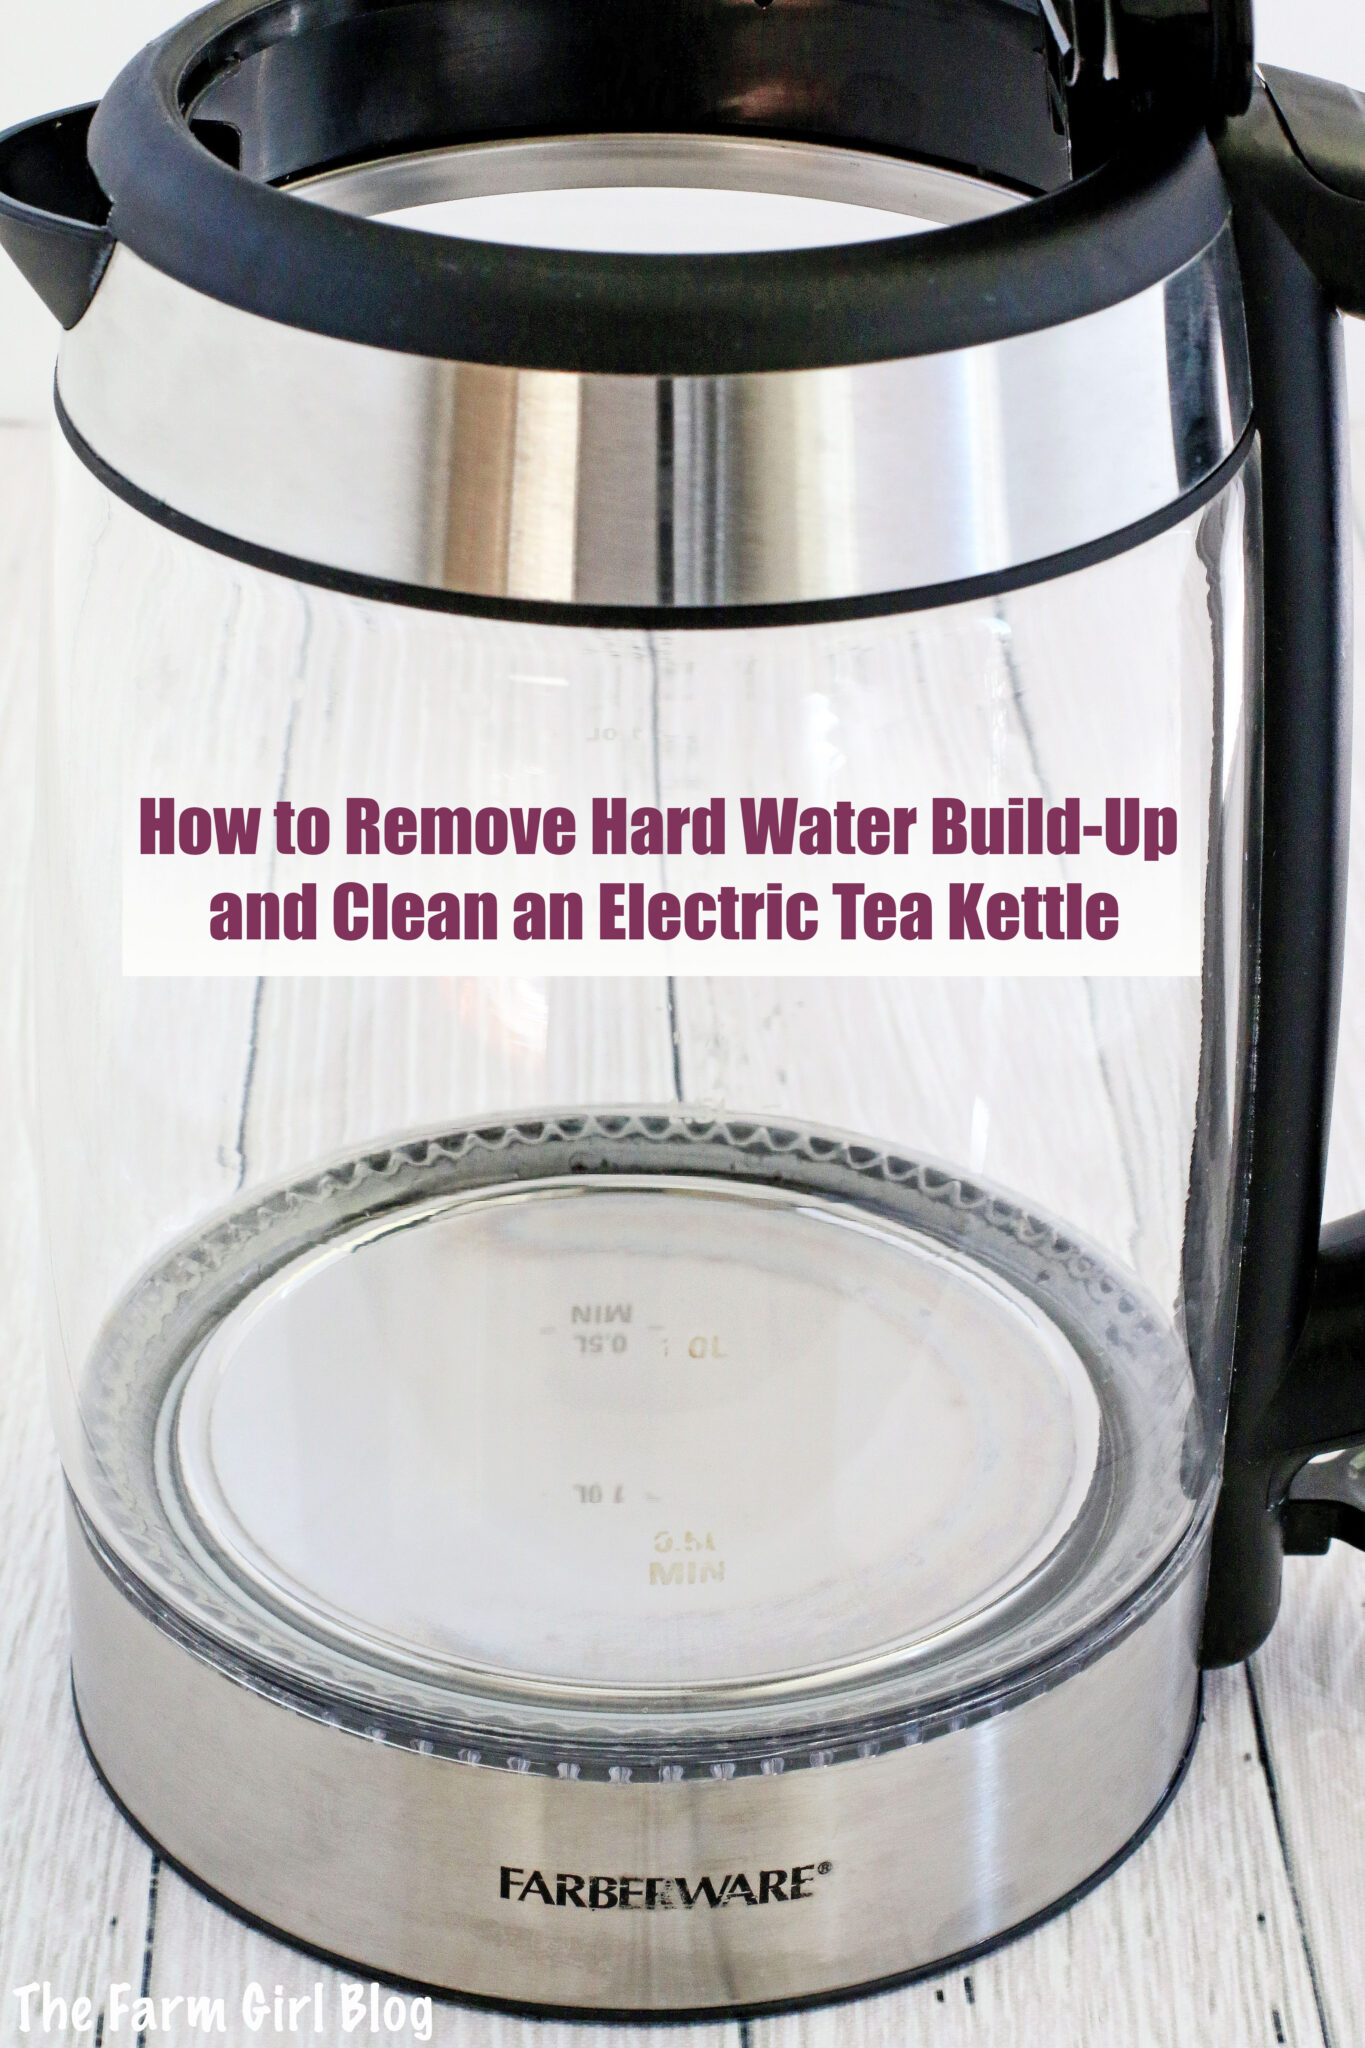 How to Remove Hard Water Build-Up and Clean an Electric Tea Kettle